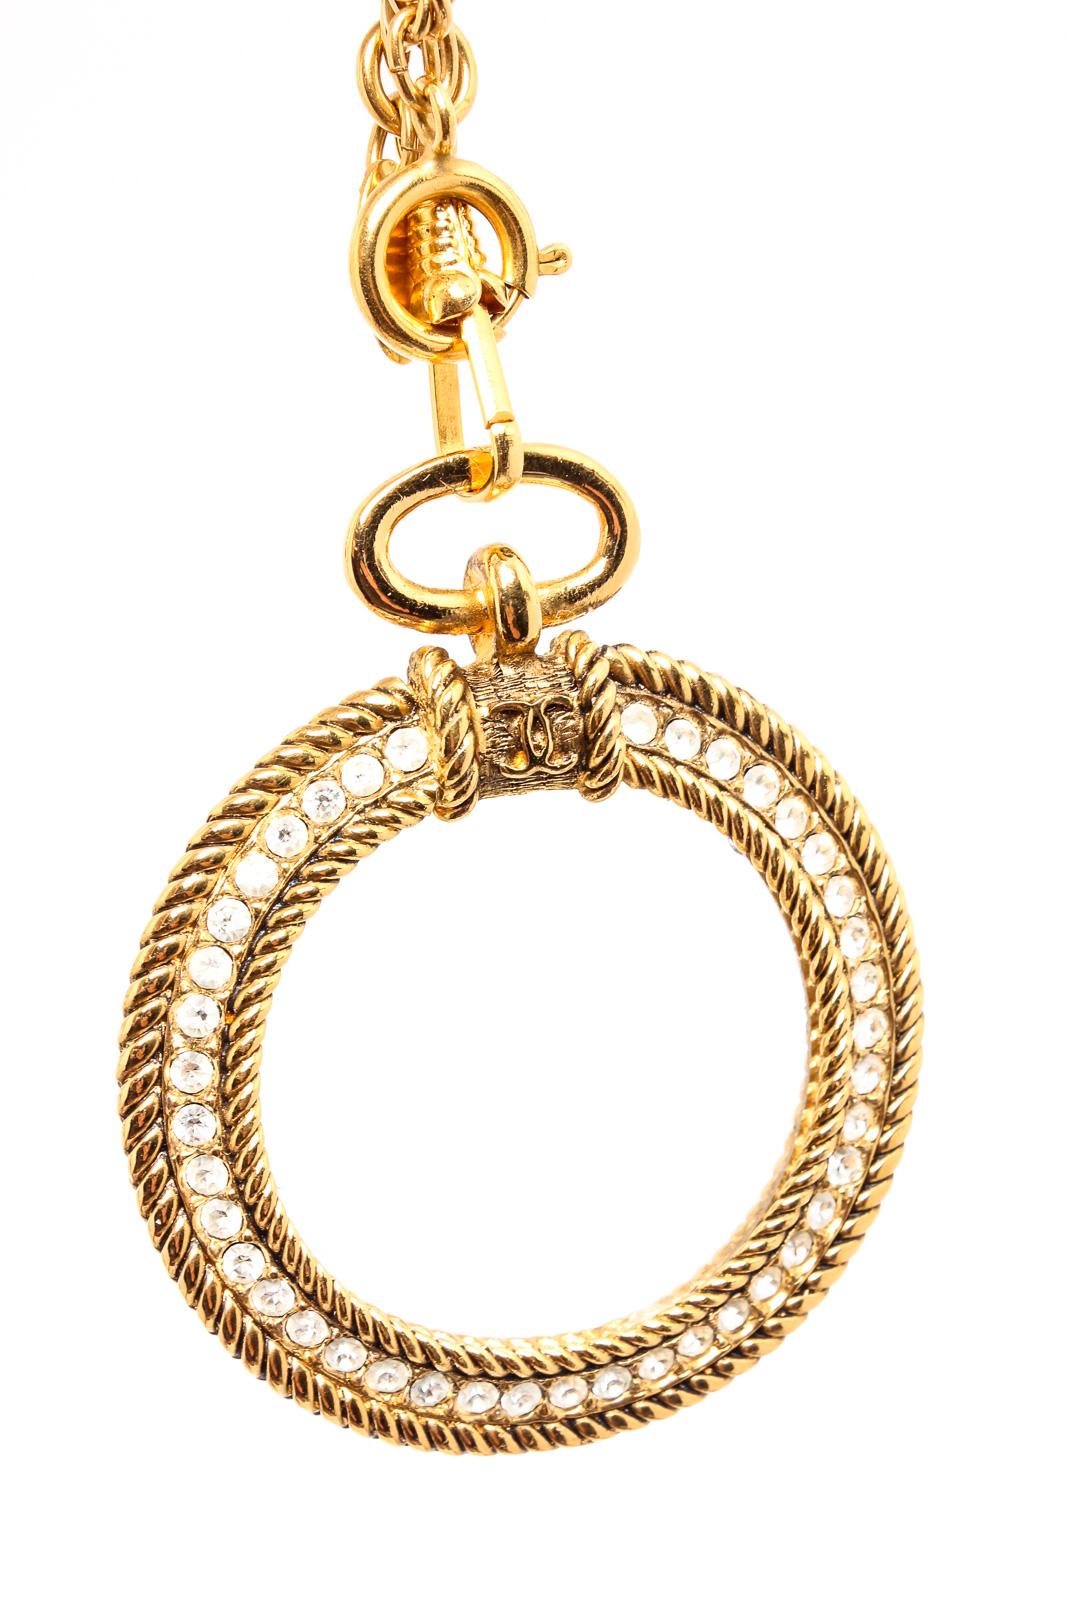 Women's Chanel Vintage Gold Tone Faux Pearl Magnifying Glass Medallion Necklace